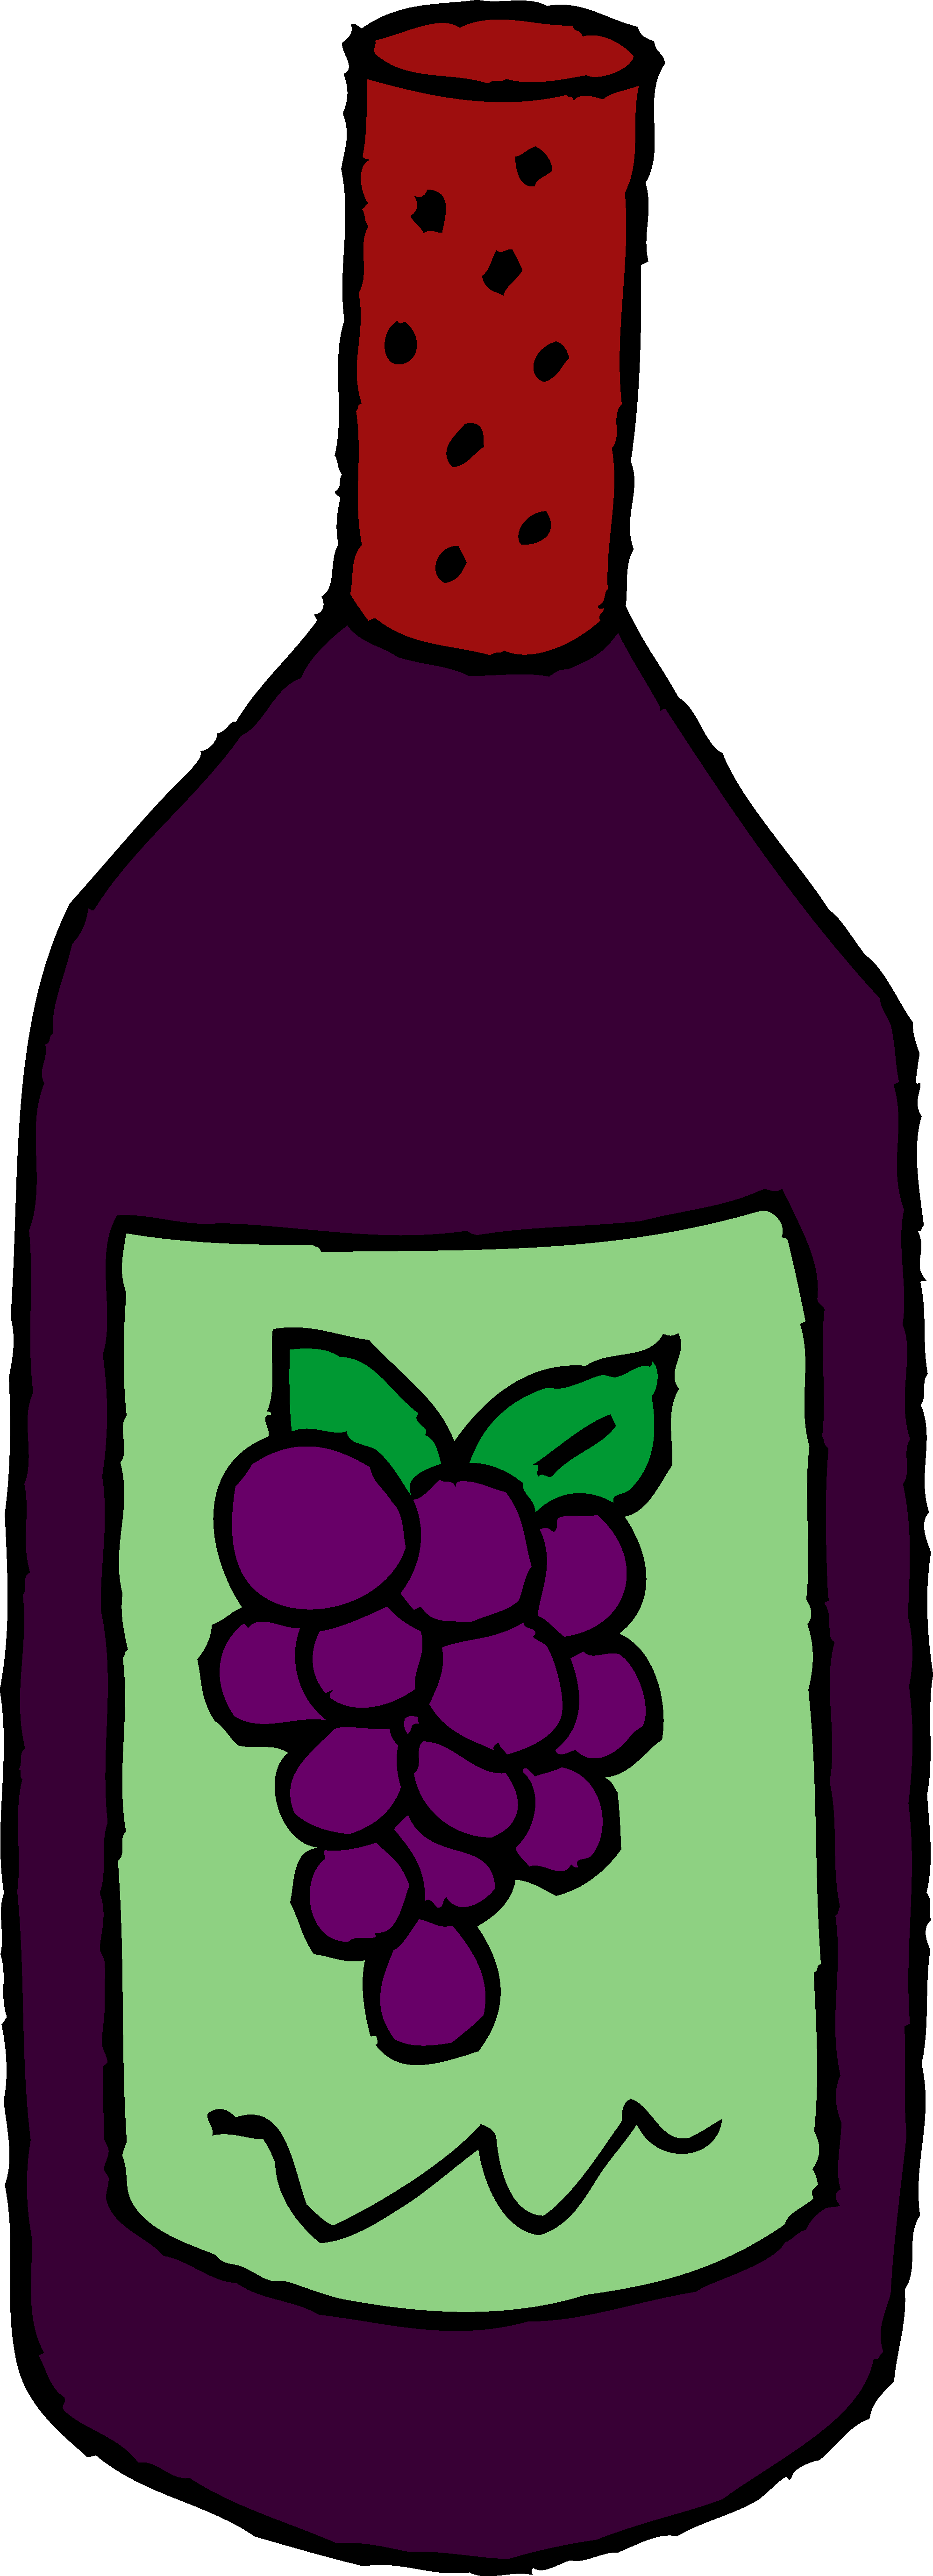 Bottle of Red Wine Clipart - Free Clip Art